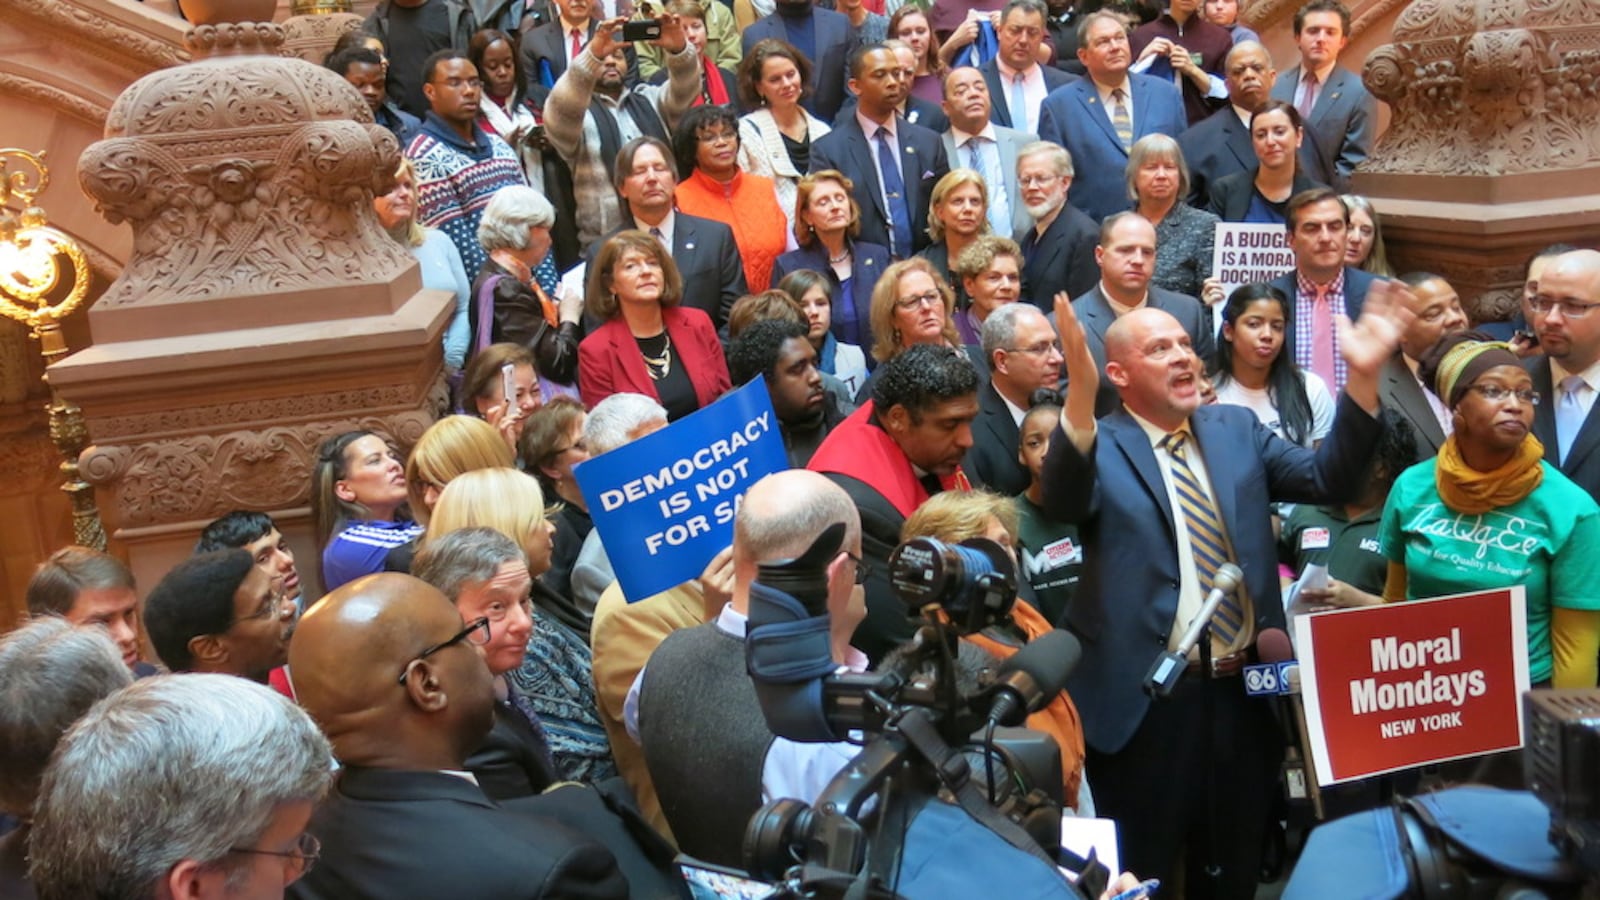 UFT President Michael Mulgrew speaks in the Capitol building in Albany in 2015, where advocates are renewing a push for the state to increase school funding for poorer districts.